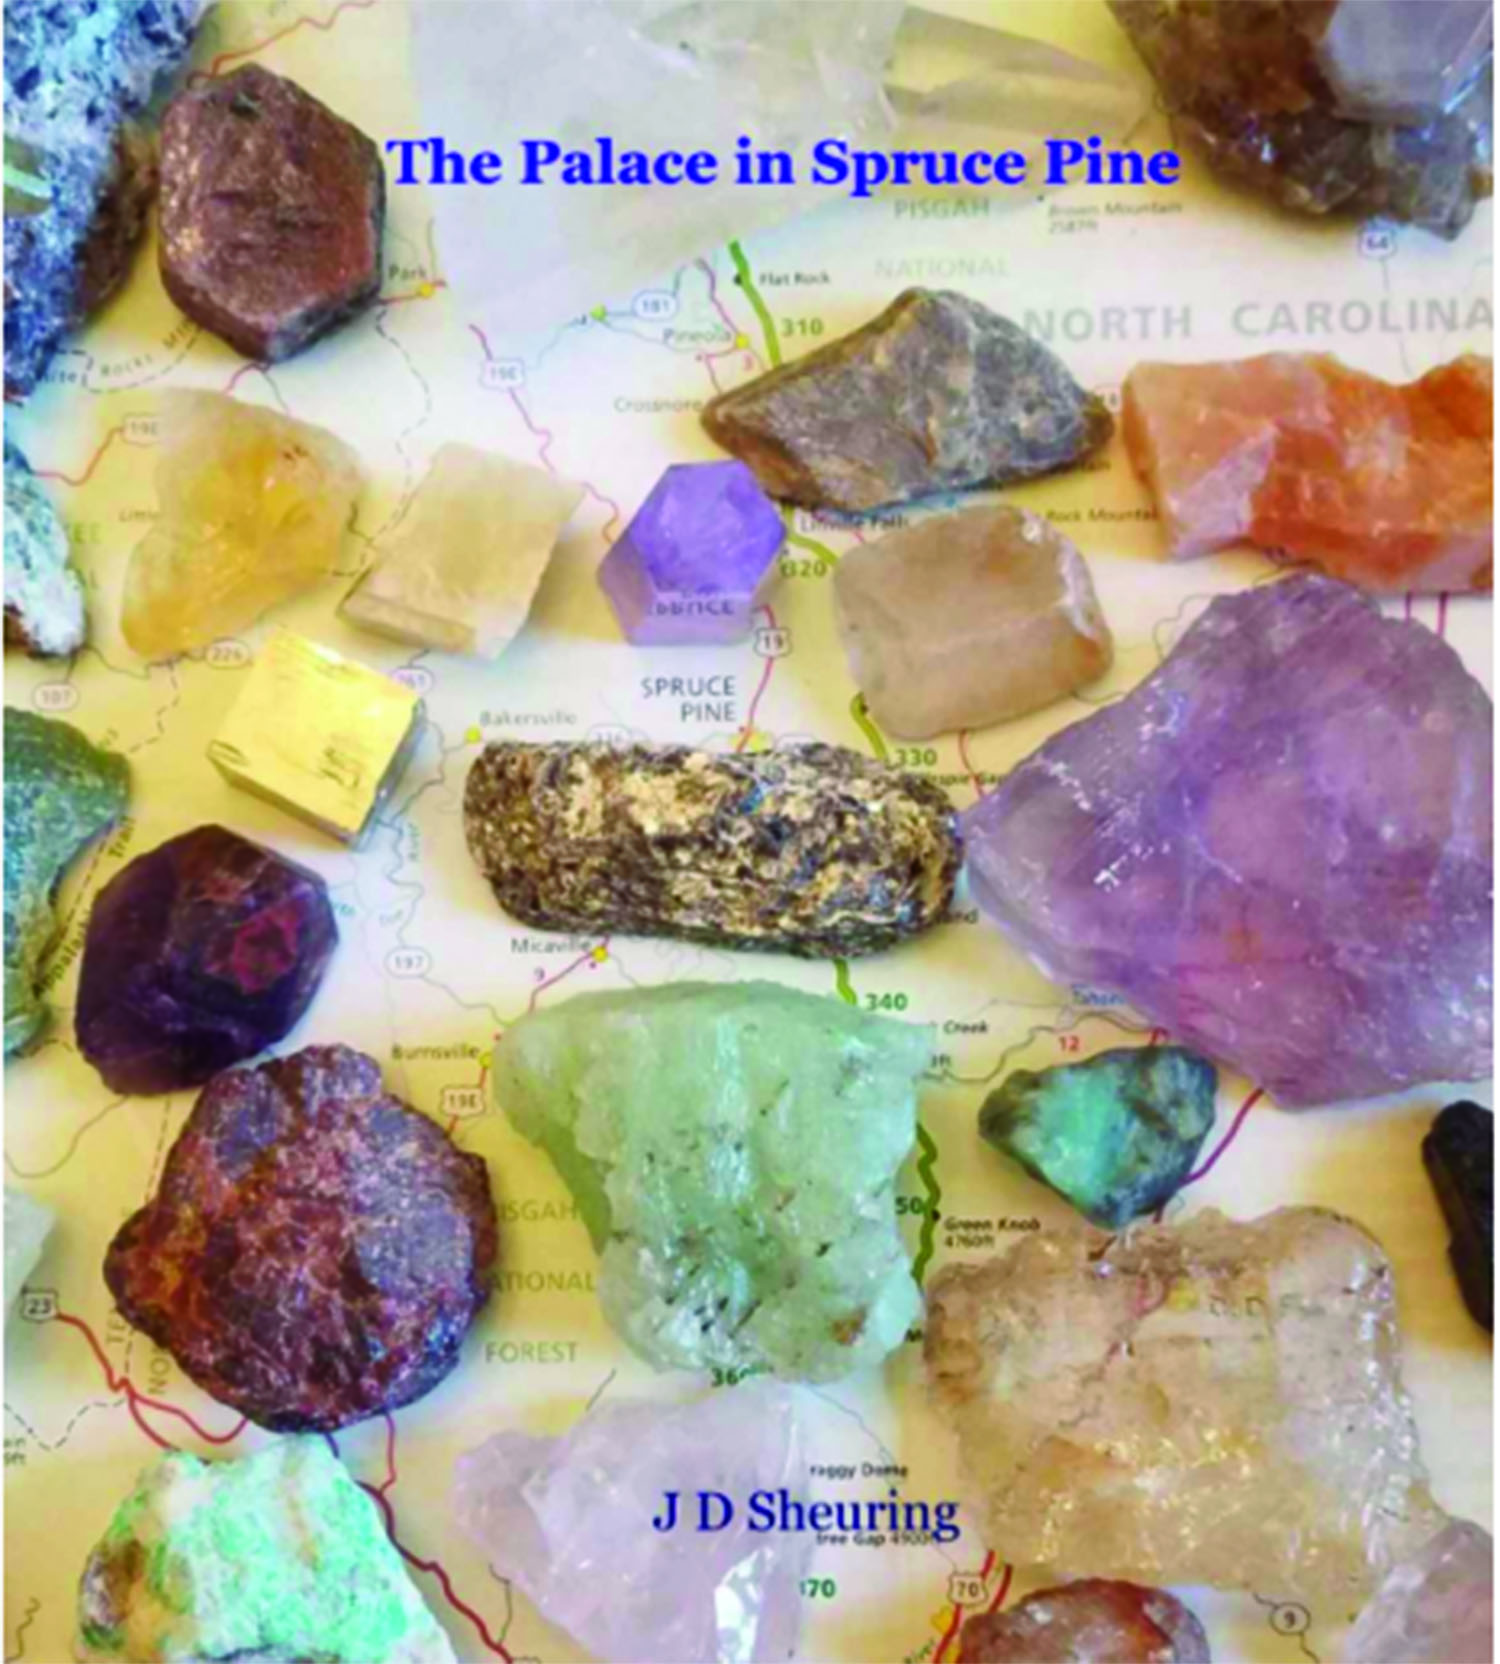 The cover of John Sheuring’s new book, The Palace in Spruce Pine. The book is available on Amazon Kindle. (Submitted photo)